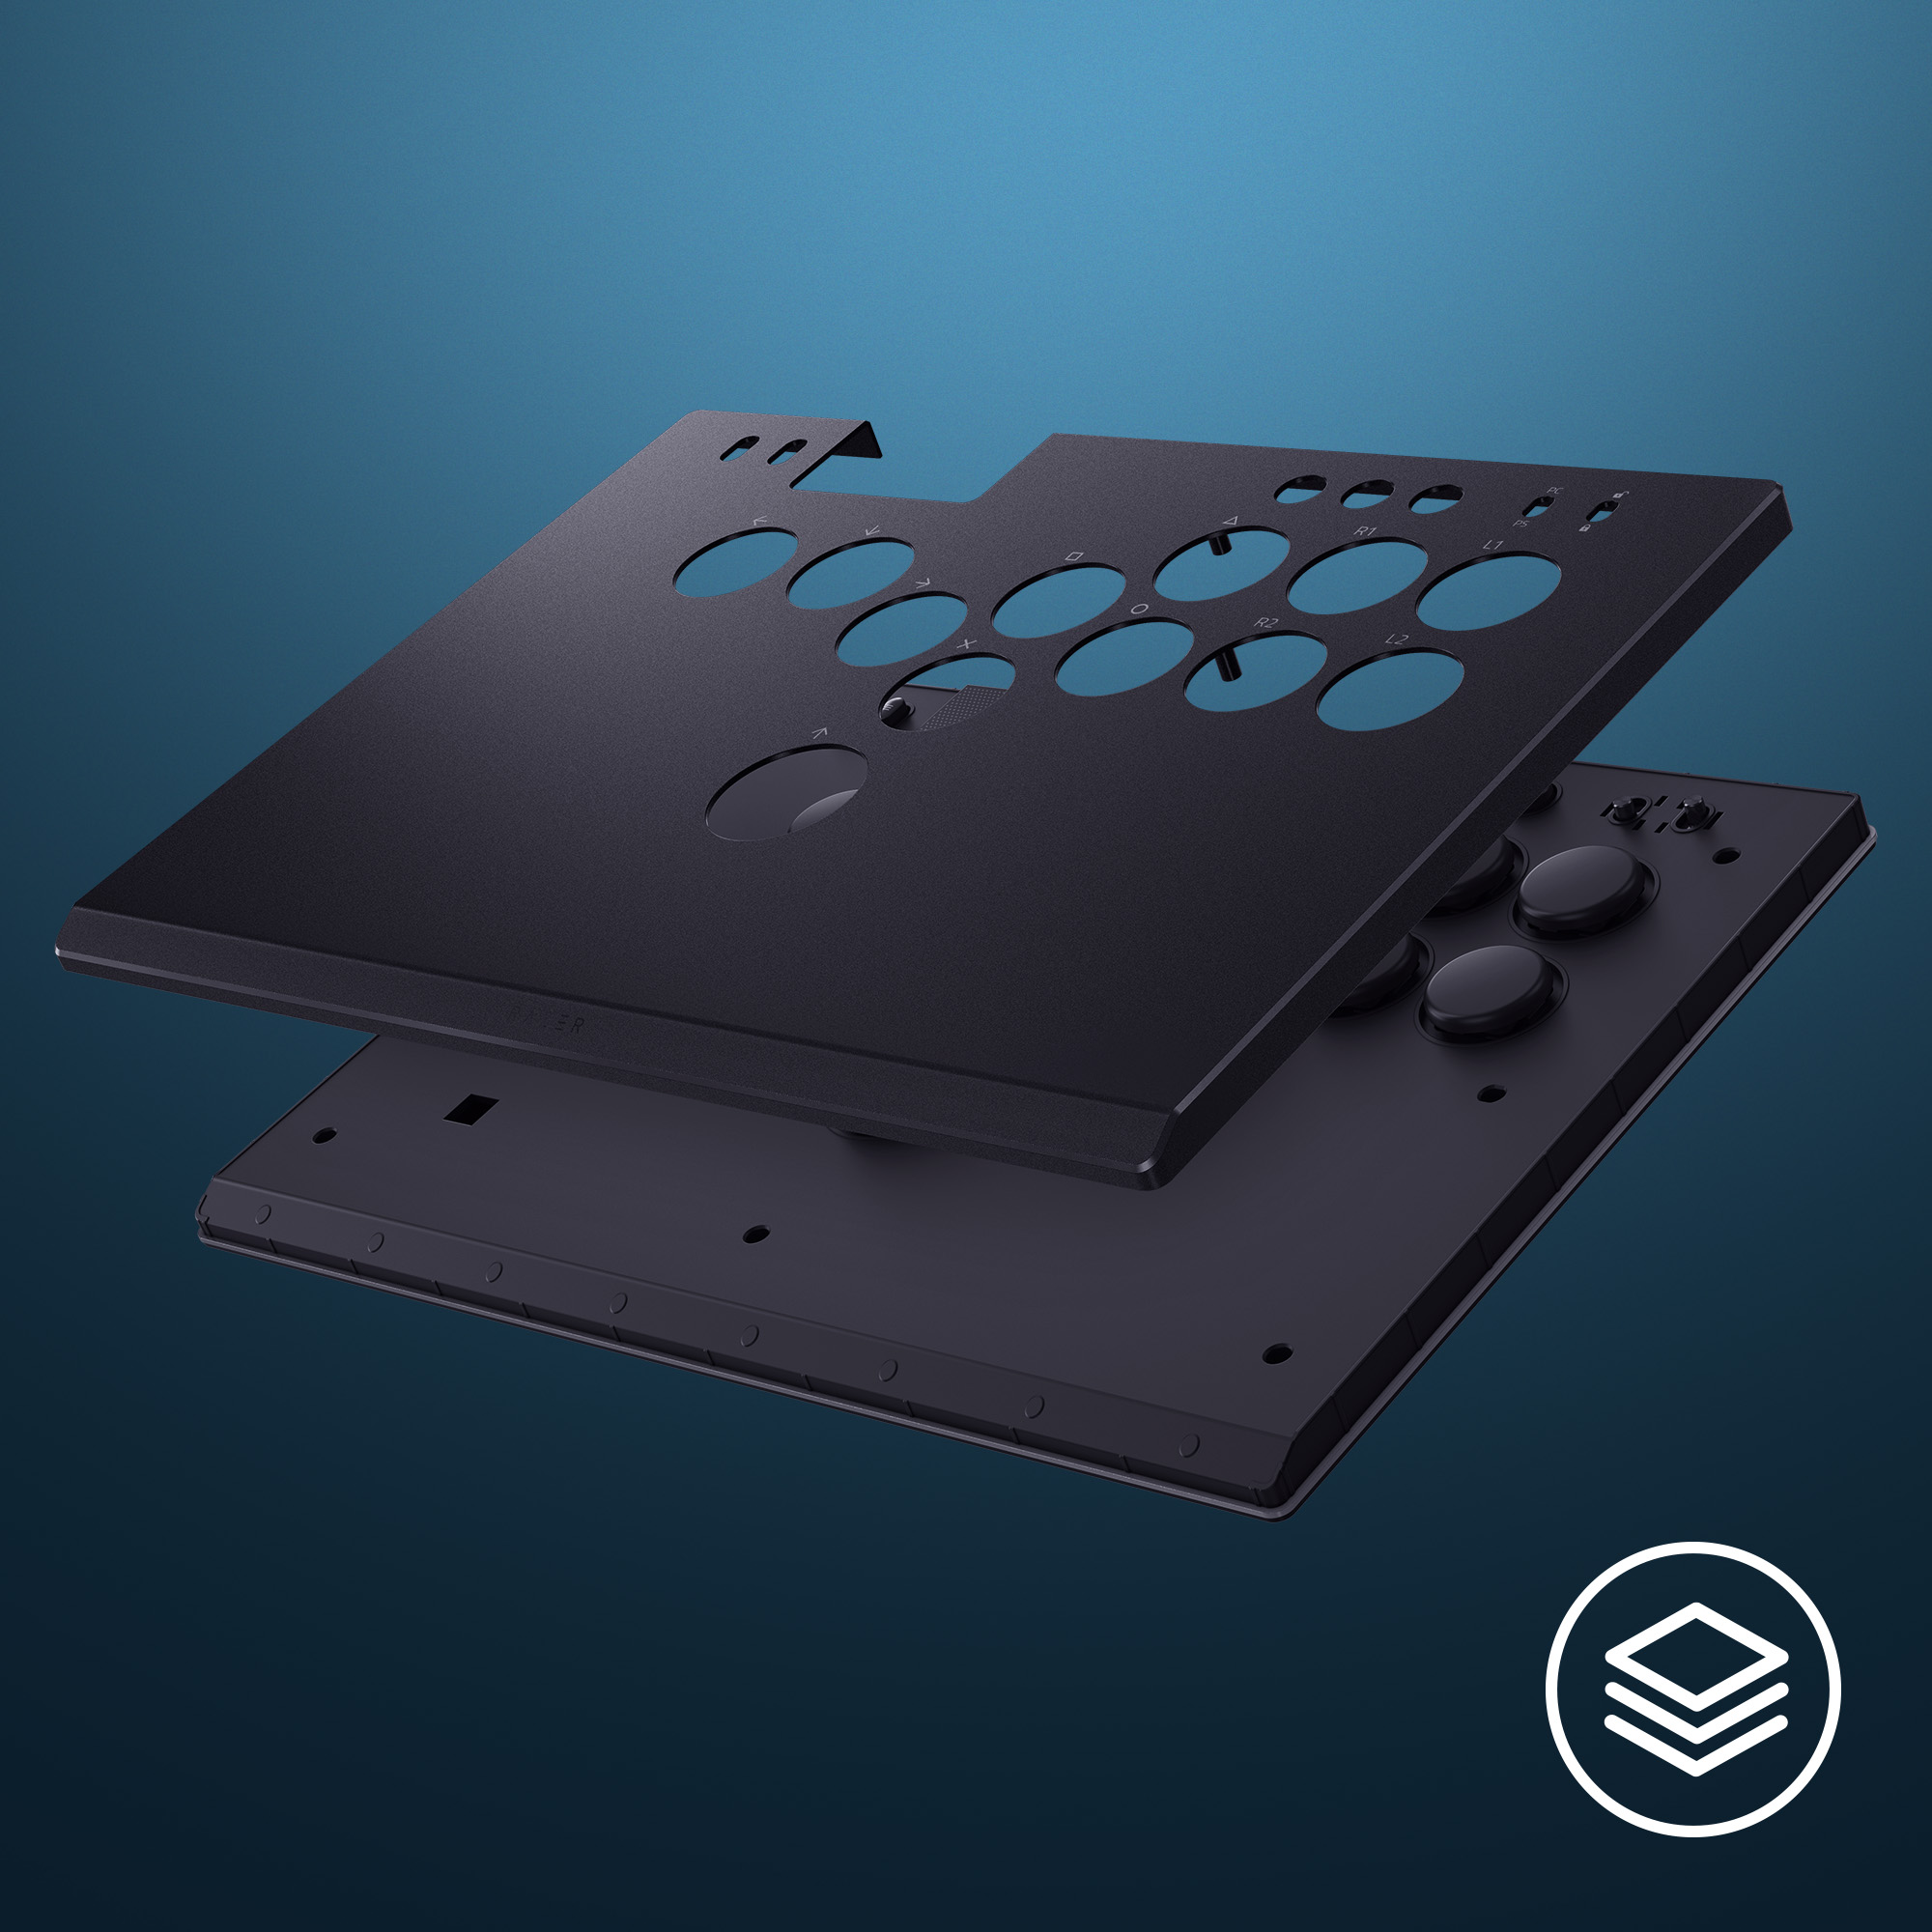 [NEW] Razer Kitsune - All-Button Optical Arcade Controller for PS5™ and PC (Bộ điều khiển Arcade) | Low-Profile Optical Switches | Slim Form Factor | Removable Top Plate | Chroma RGB Lighting | USB Type C